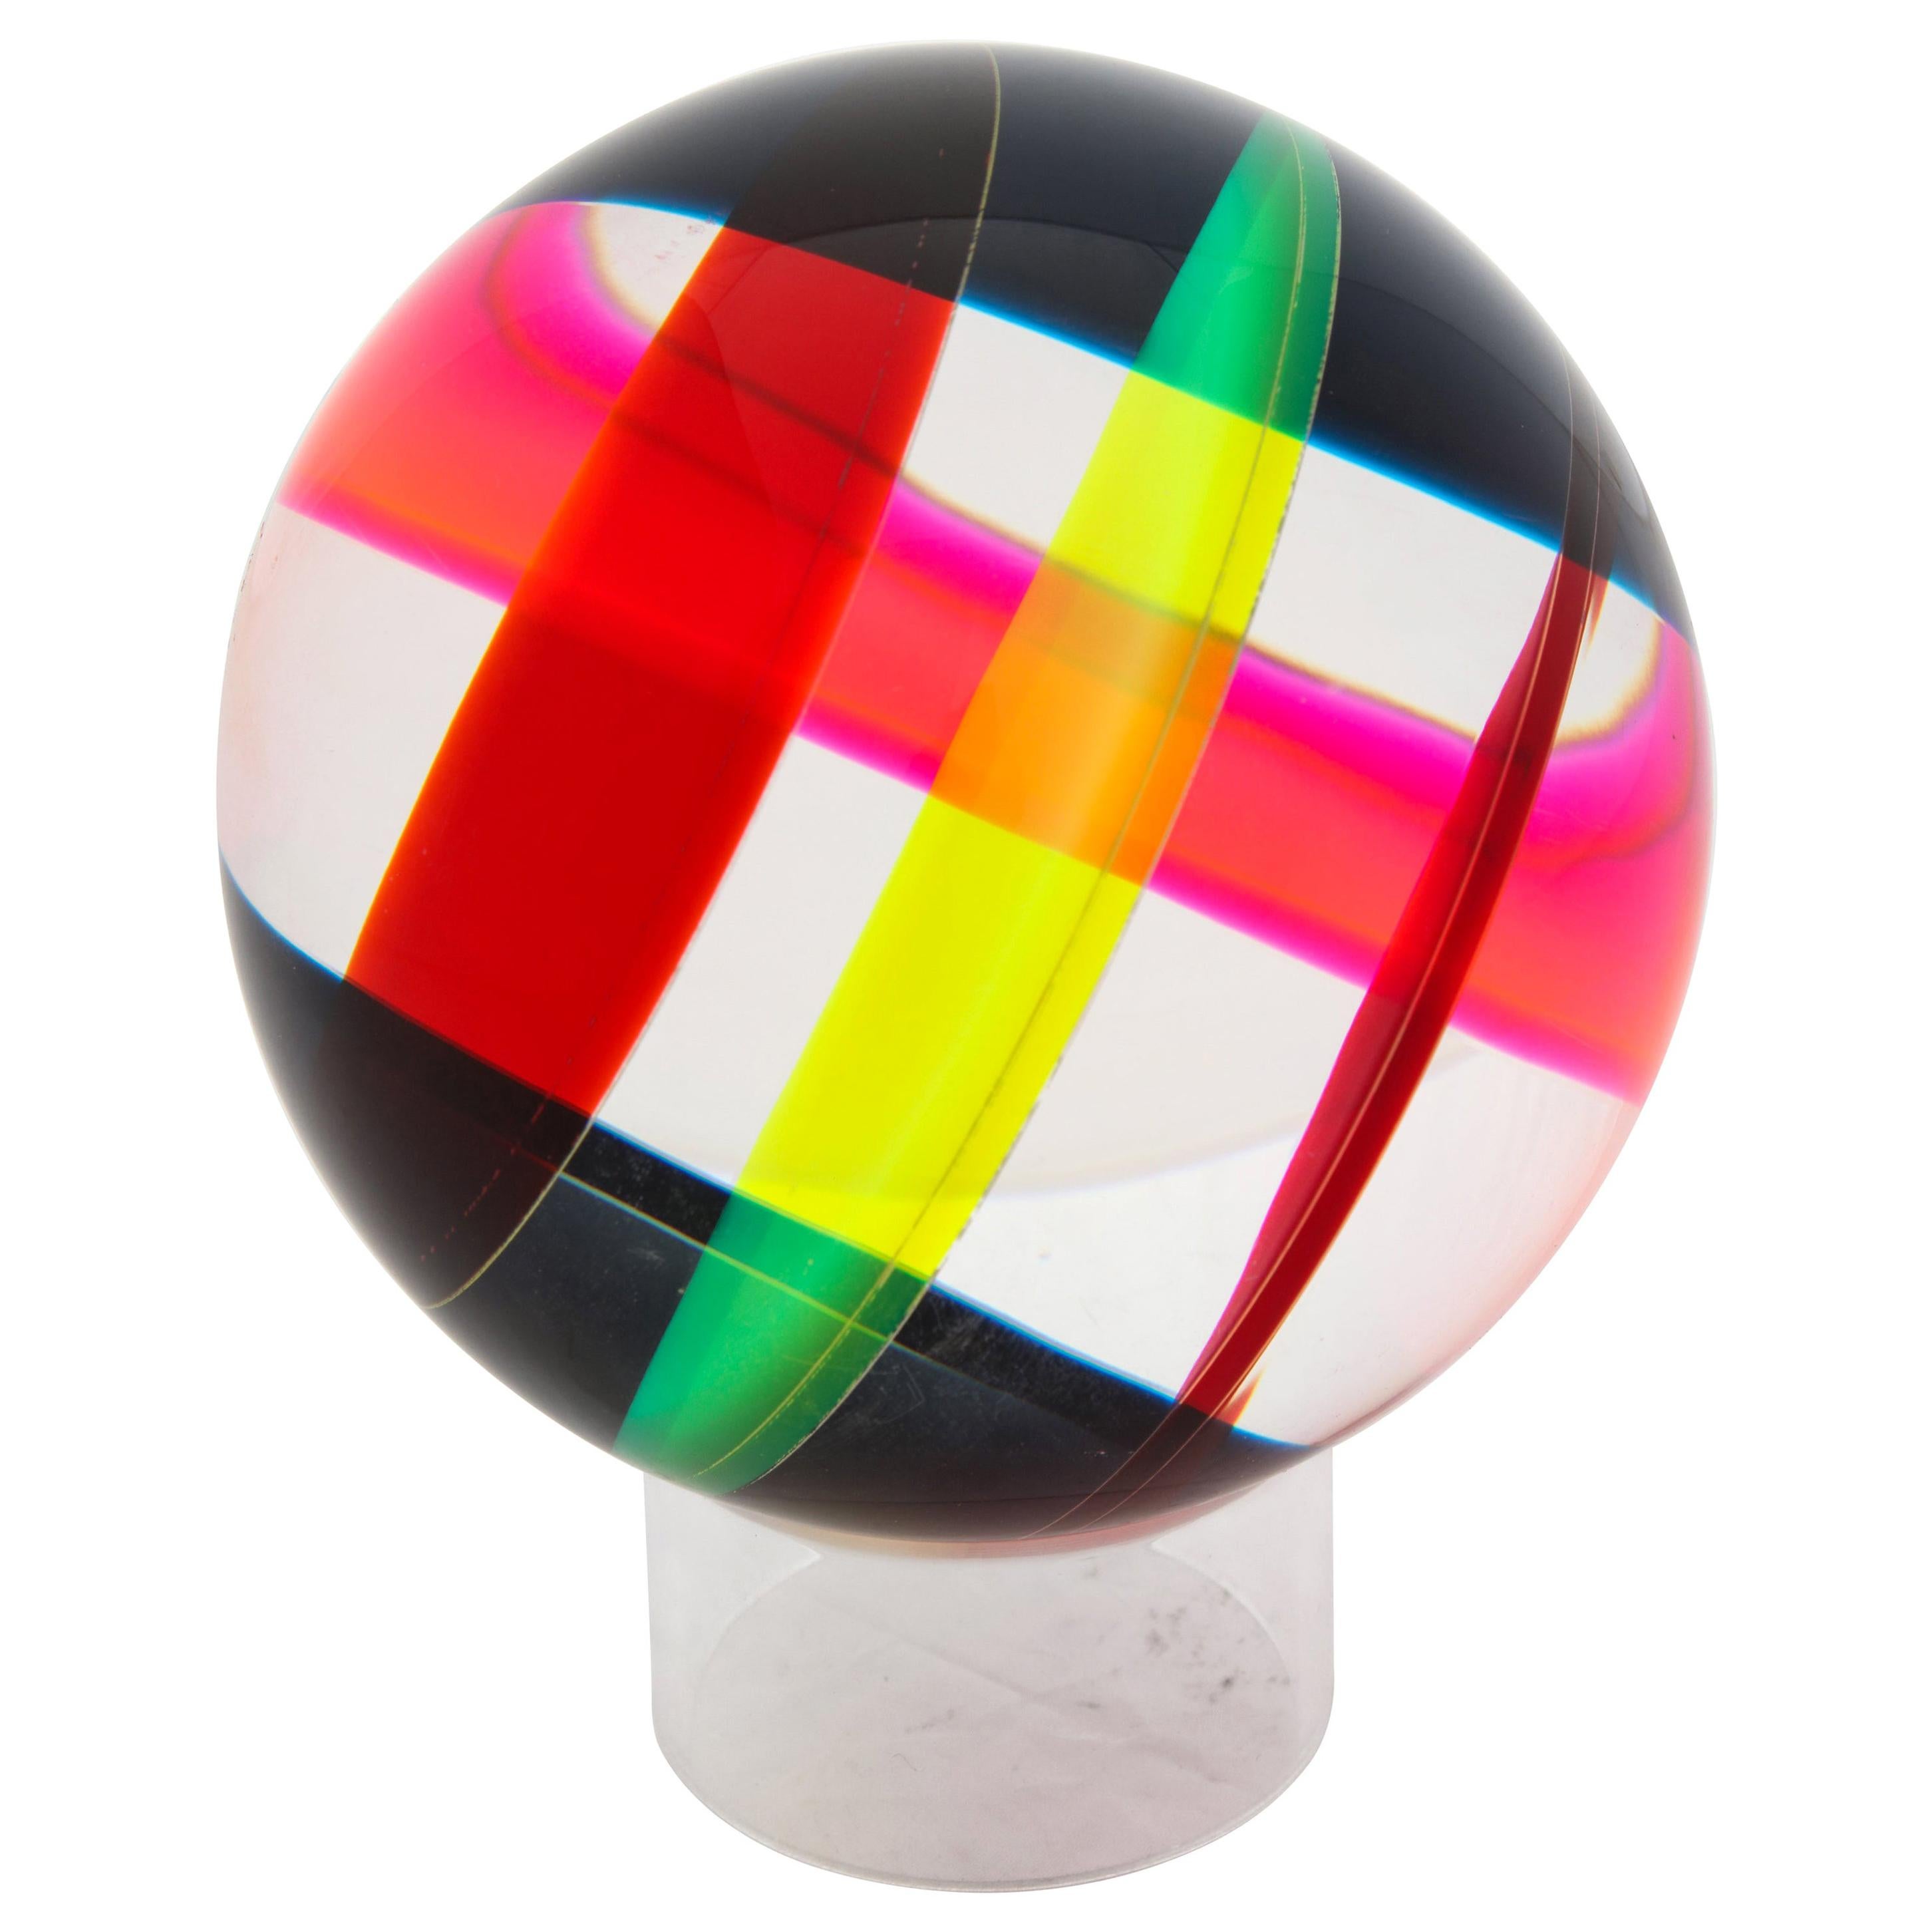 Vasa Mihich Sphere, Cast Acrylic, Red, Pink, Yellow, Black, Abstract, Signed